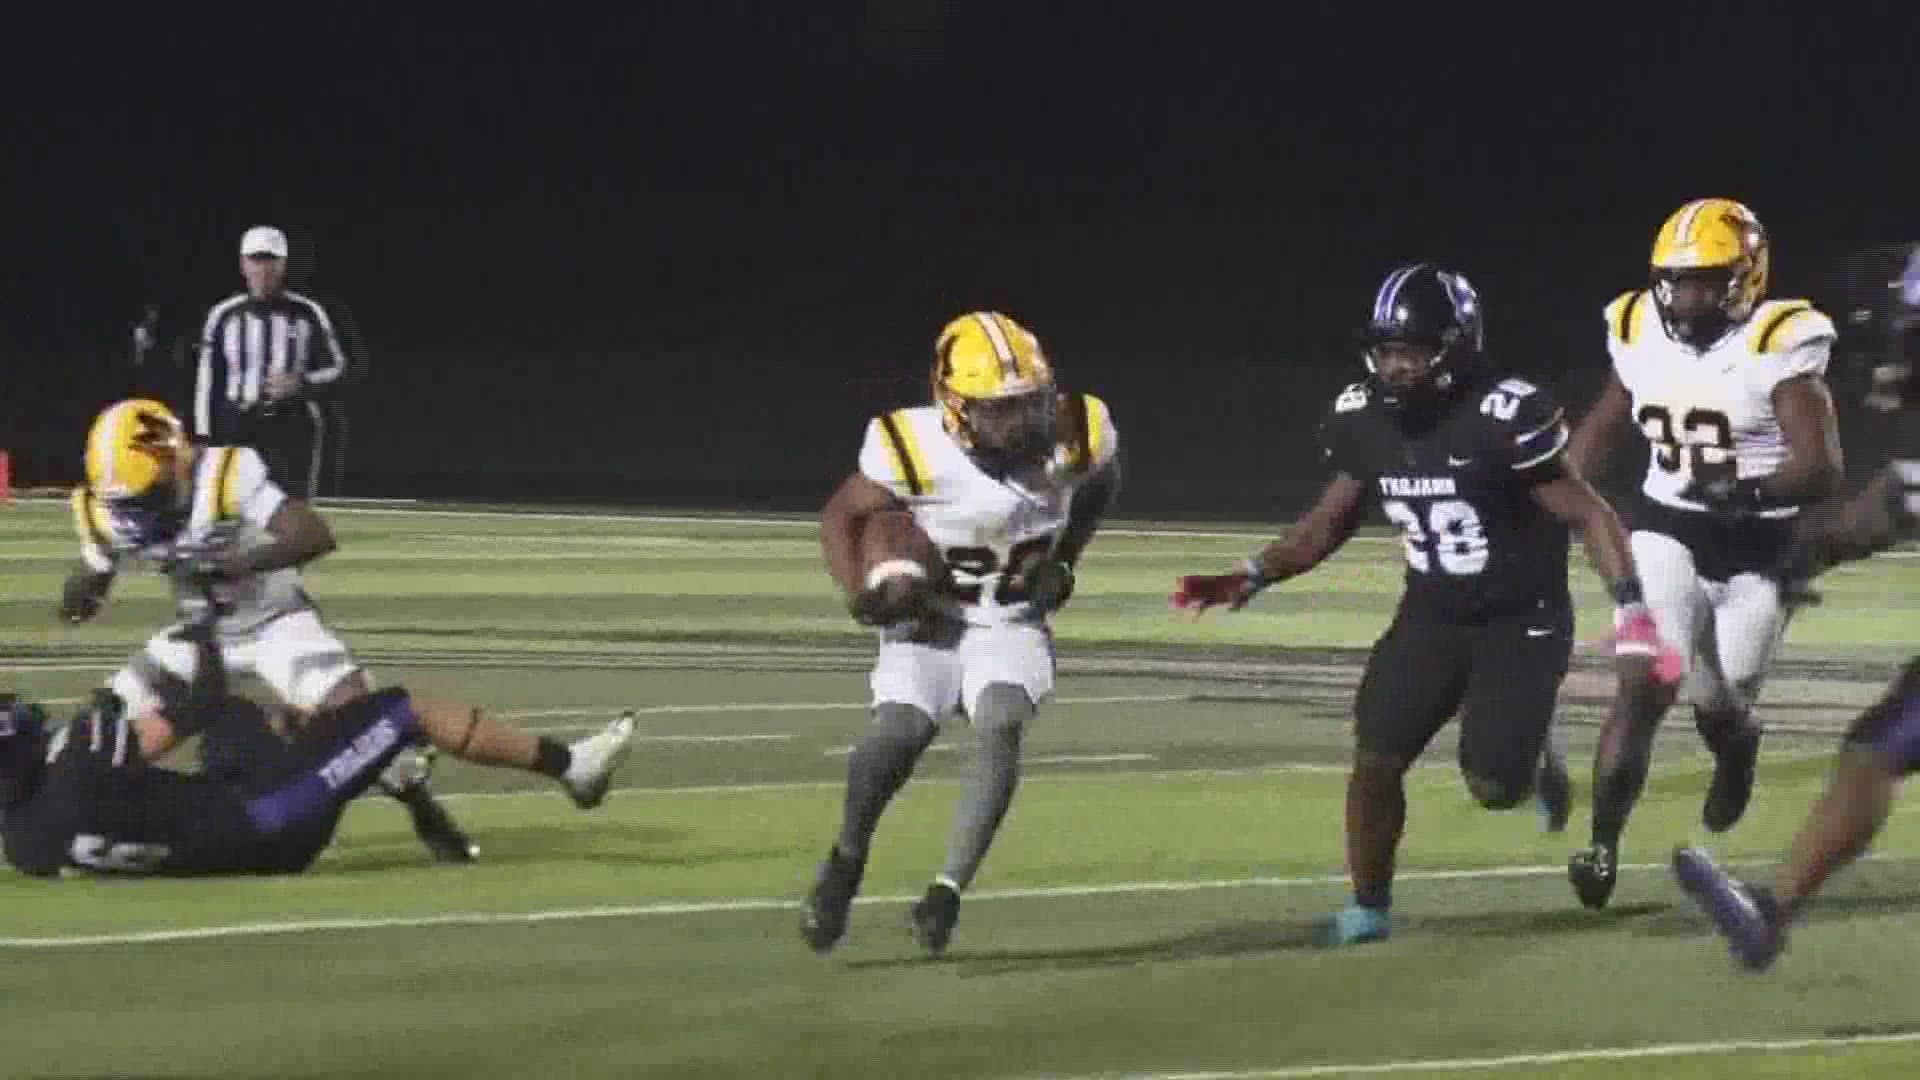 6 Sports breaks down the second round of the Central Texas High School playoffs on Friday Night Lights.